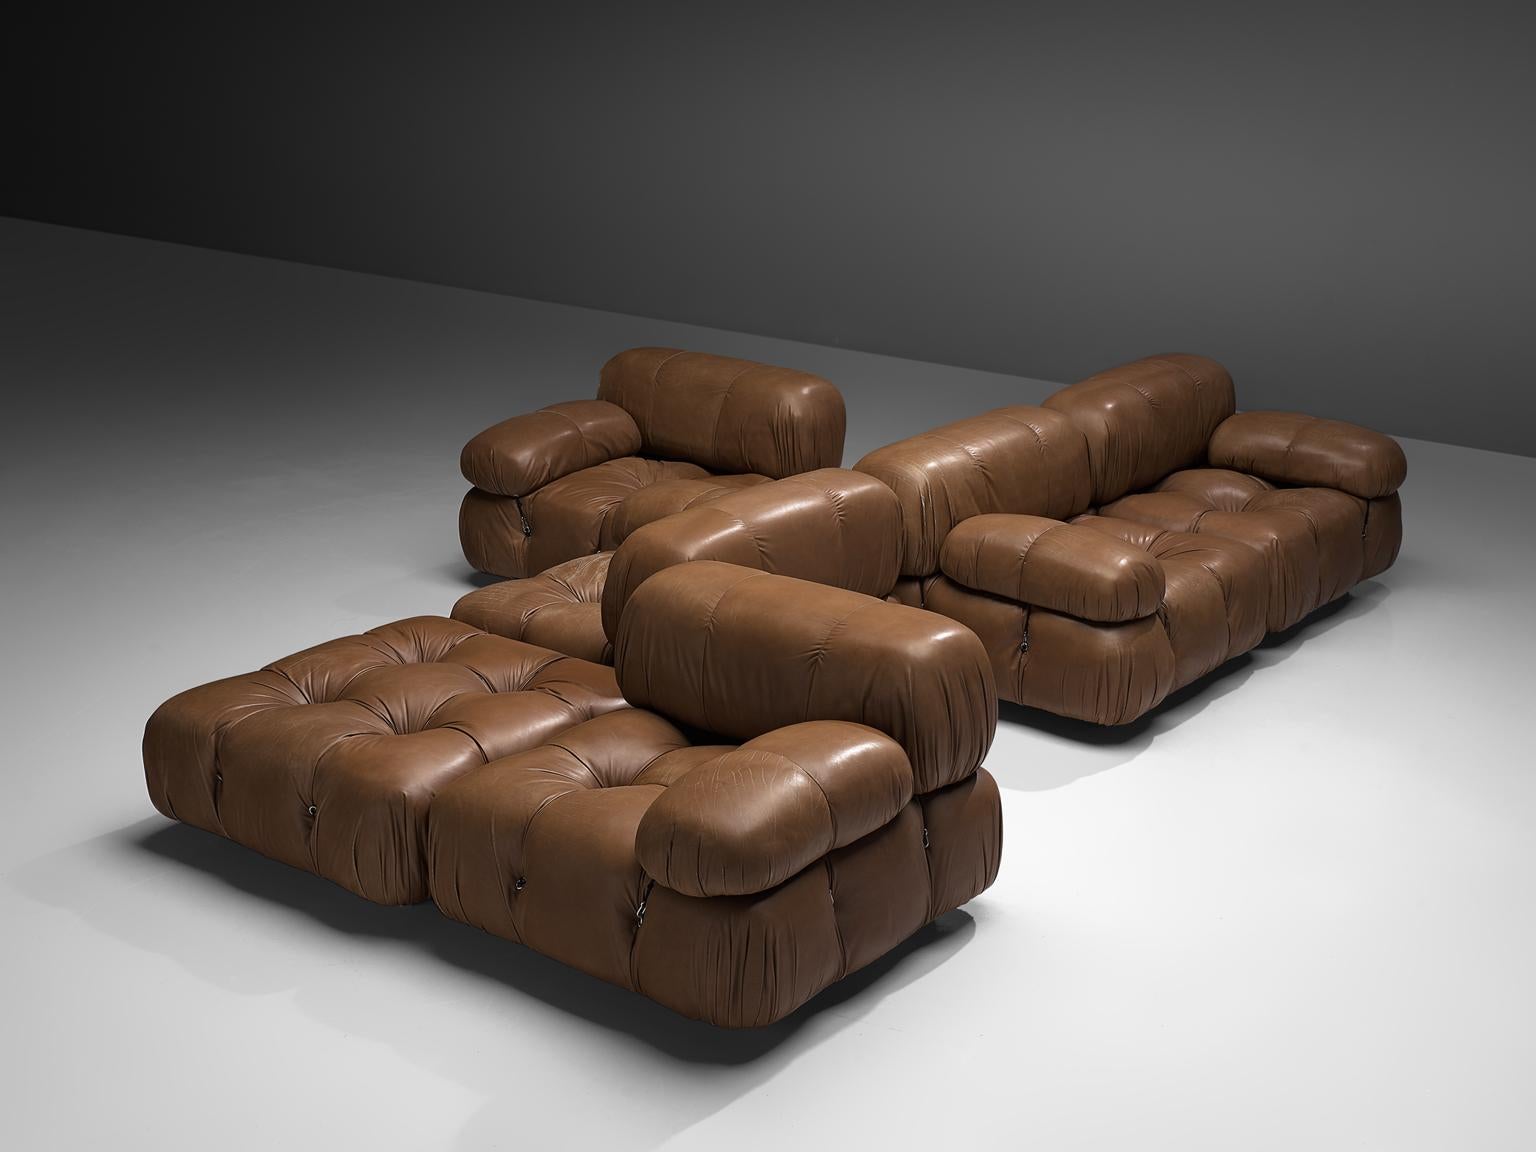 Mario Bellini, modular 'Cameleonda' sofa in original brown leather, Italy, 1972.

The sectional elements of this can be used freely and apart from one another. The backs and armrests are provided with rings and carabiners, which allows the user to